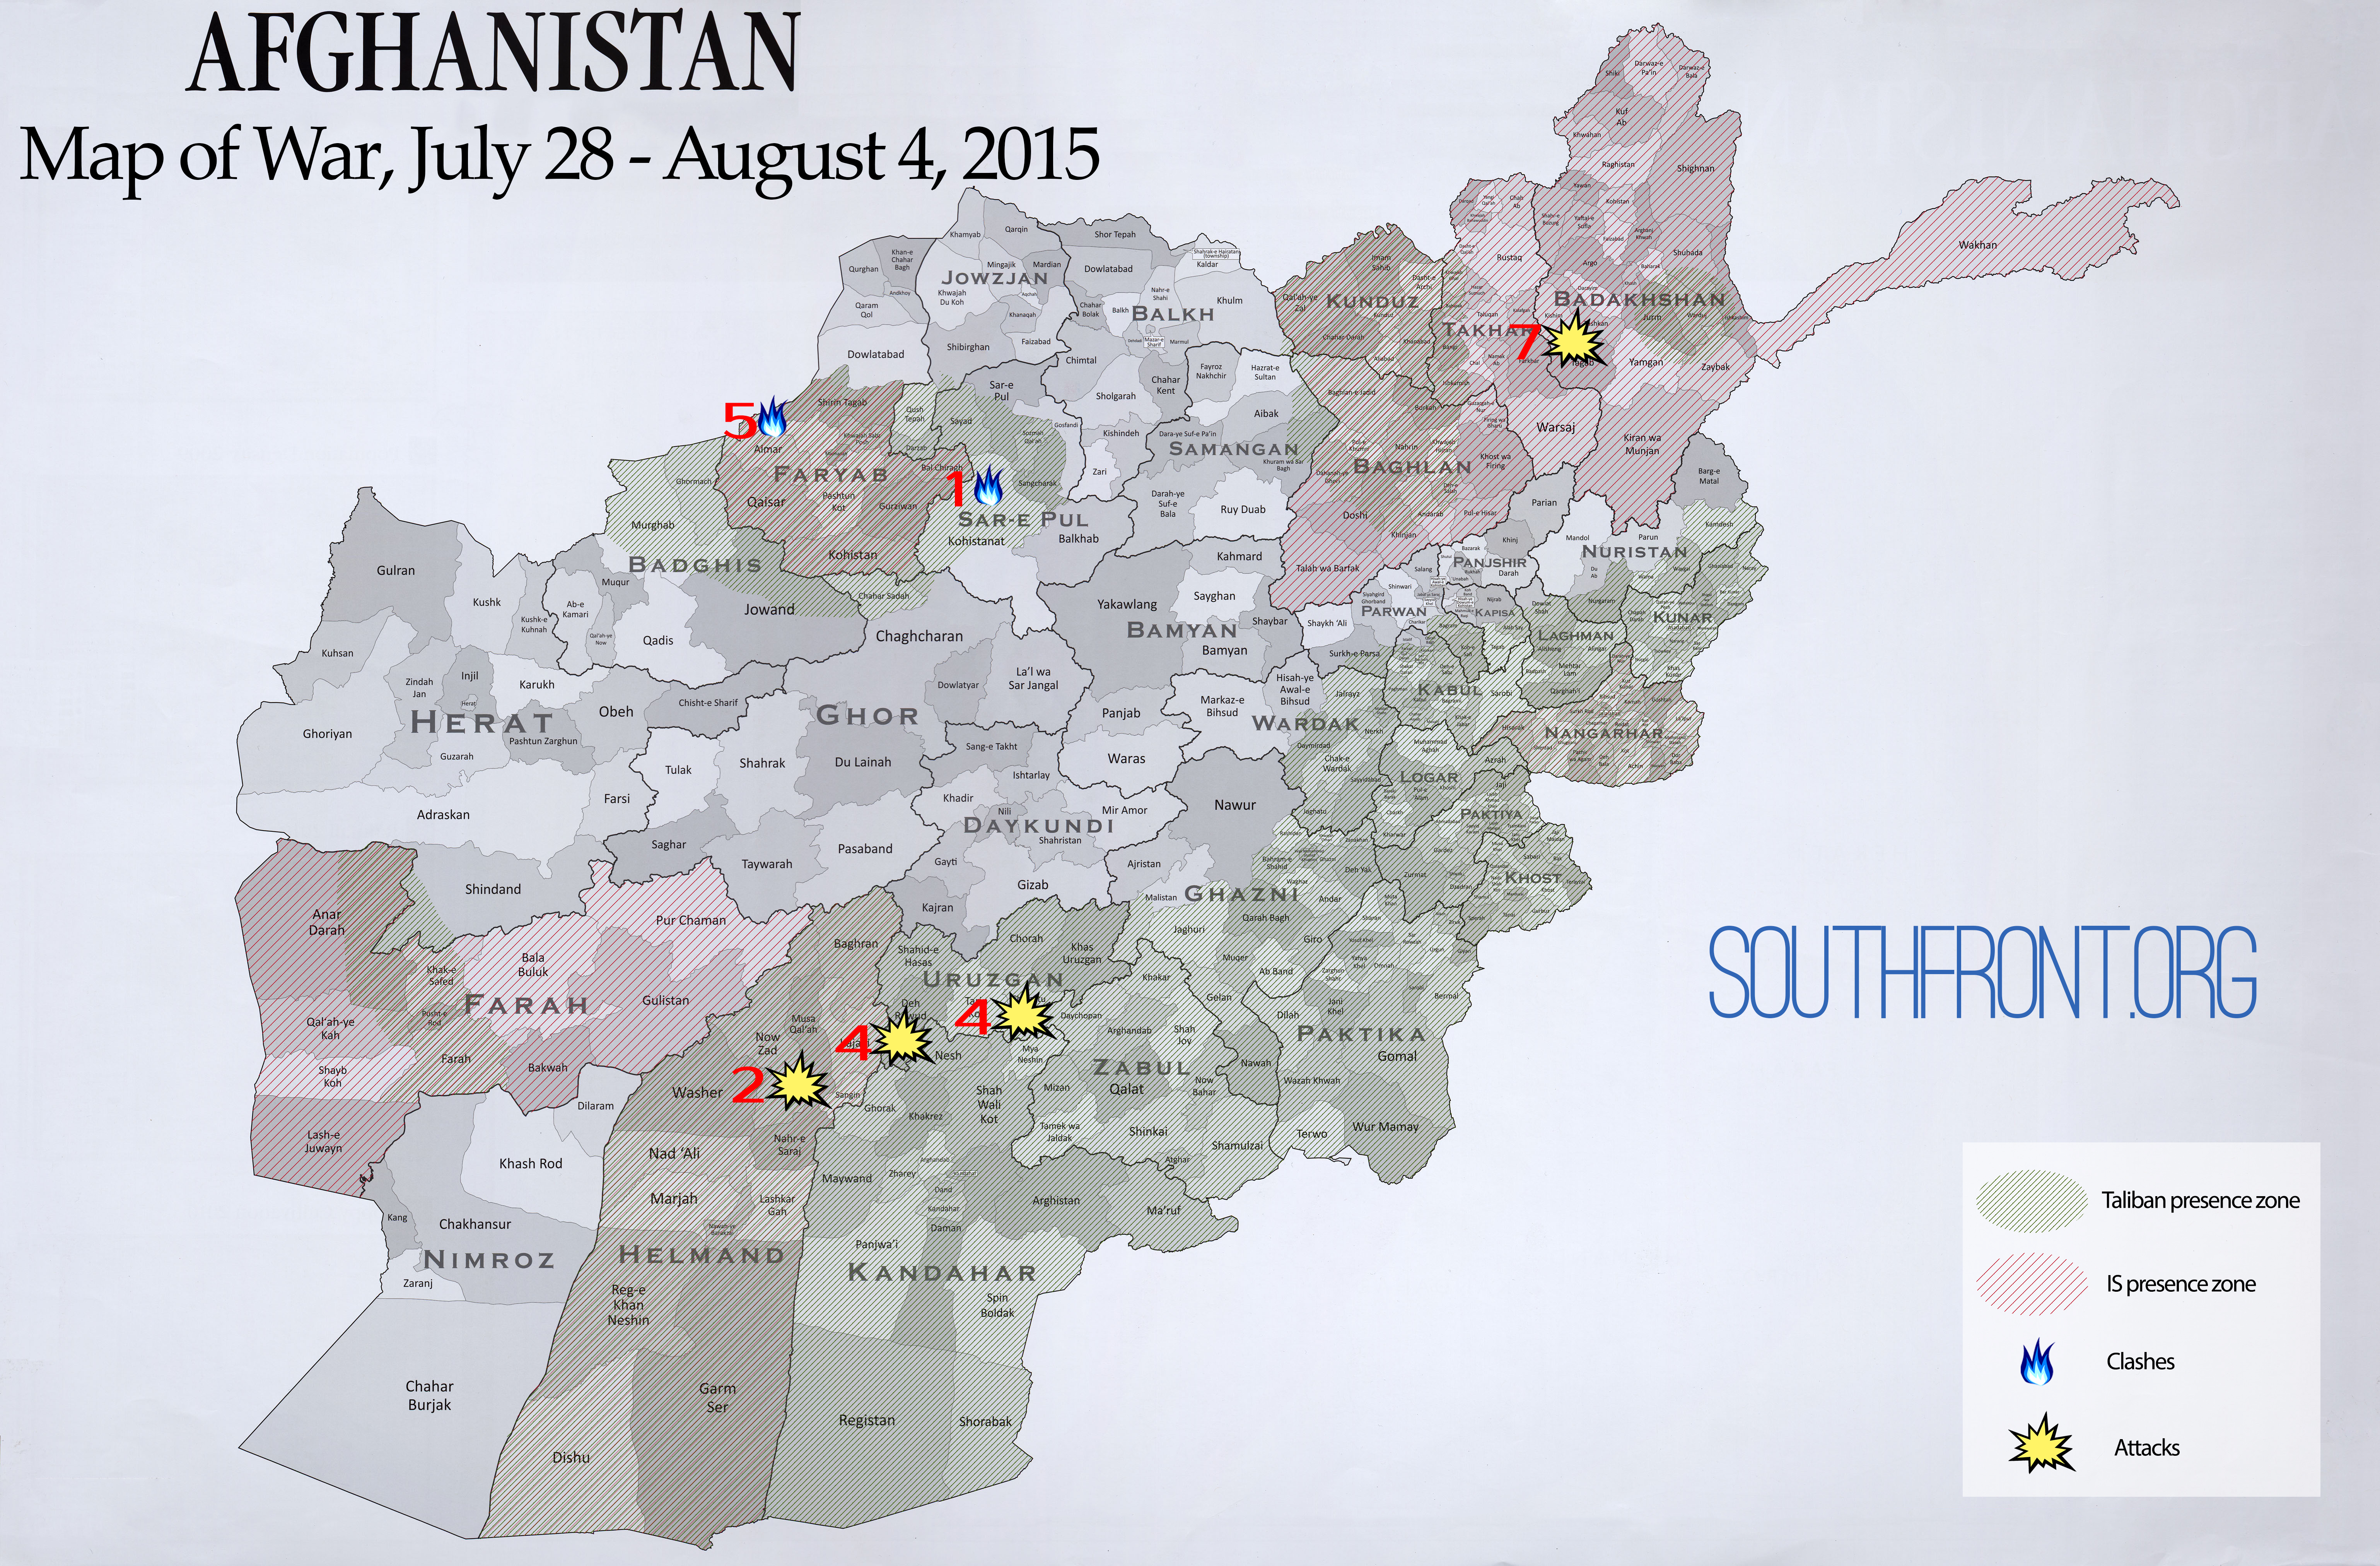 Afghanistan Map of War, July 28 - August 4, 2015